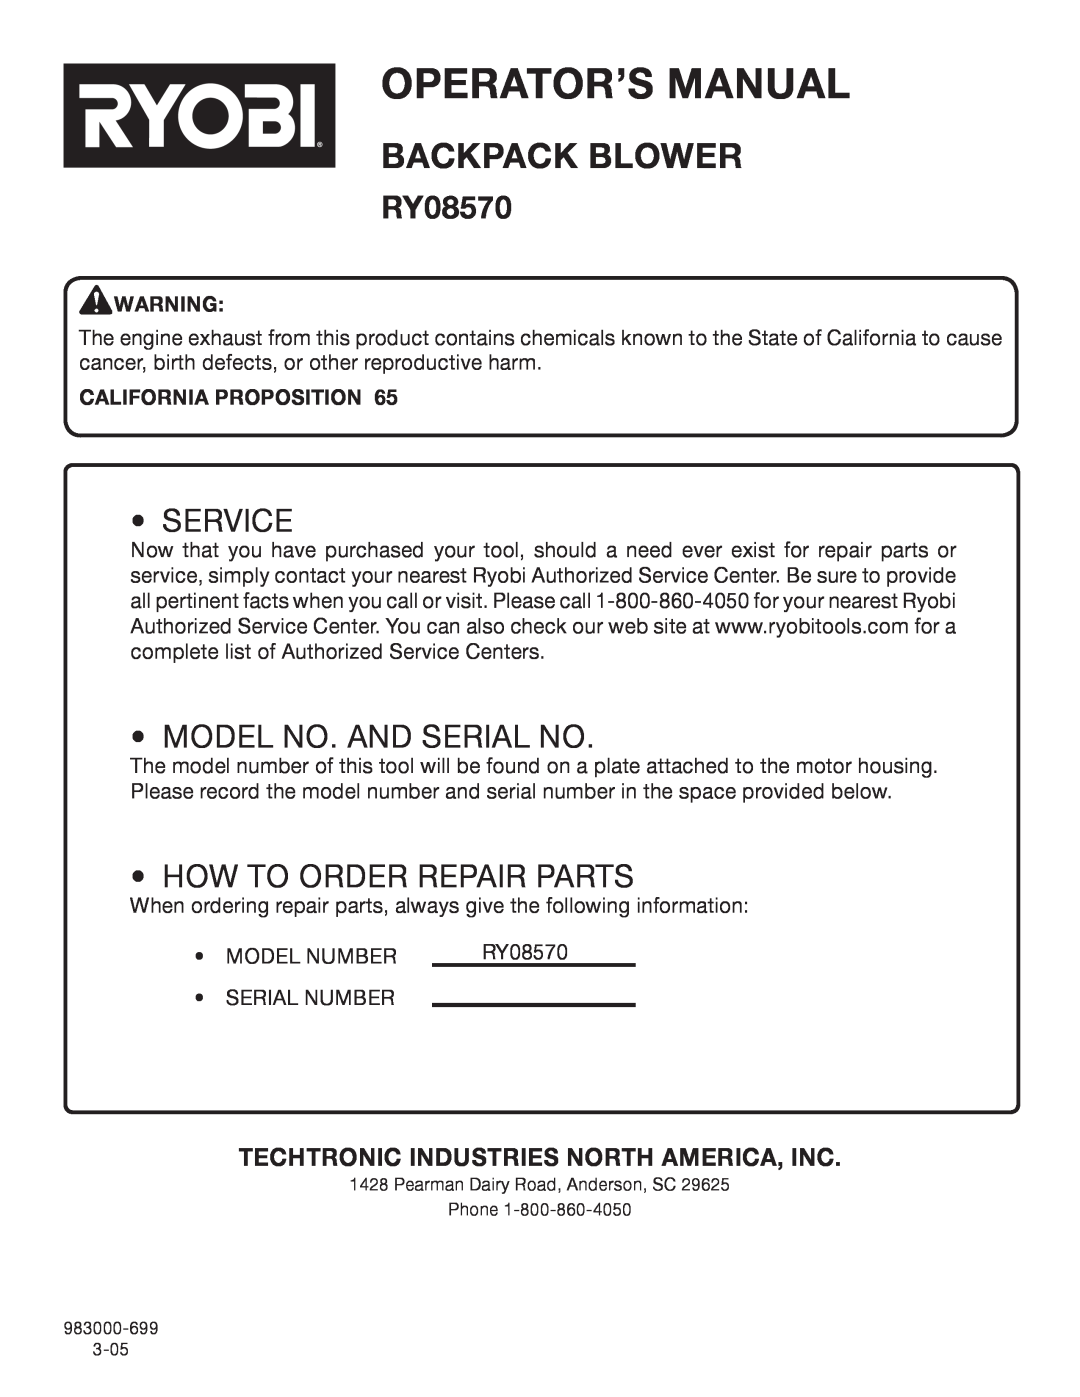 Ryobi Outdoor RY08570 Operator’S Manual, Backpack Blower, Service, Model No. And Serial No, How To Order Repair Parts 